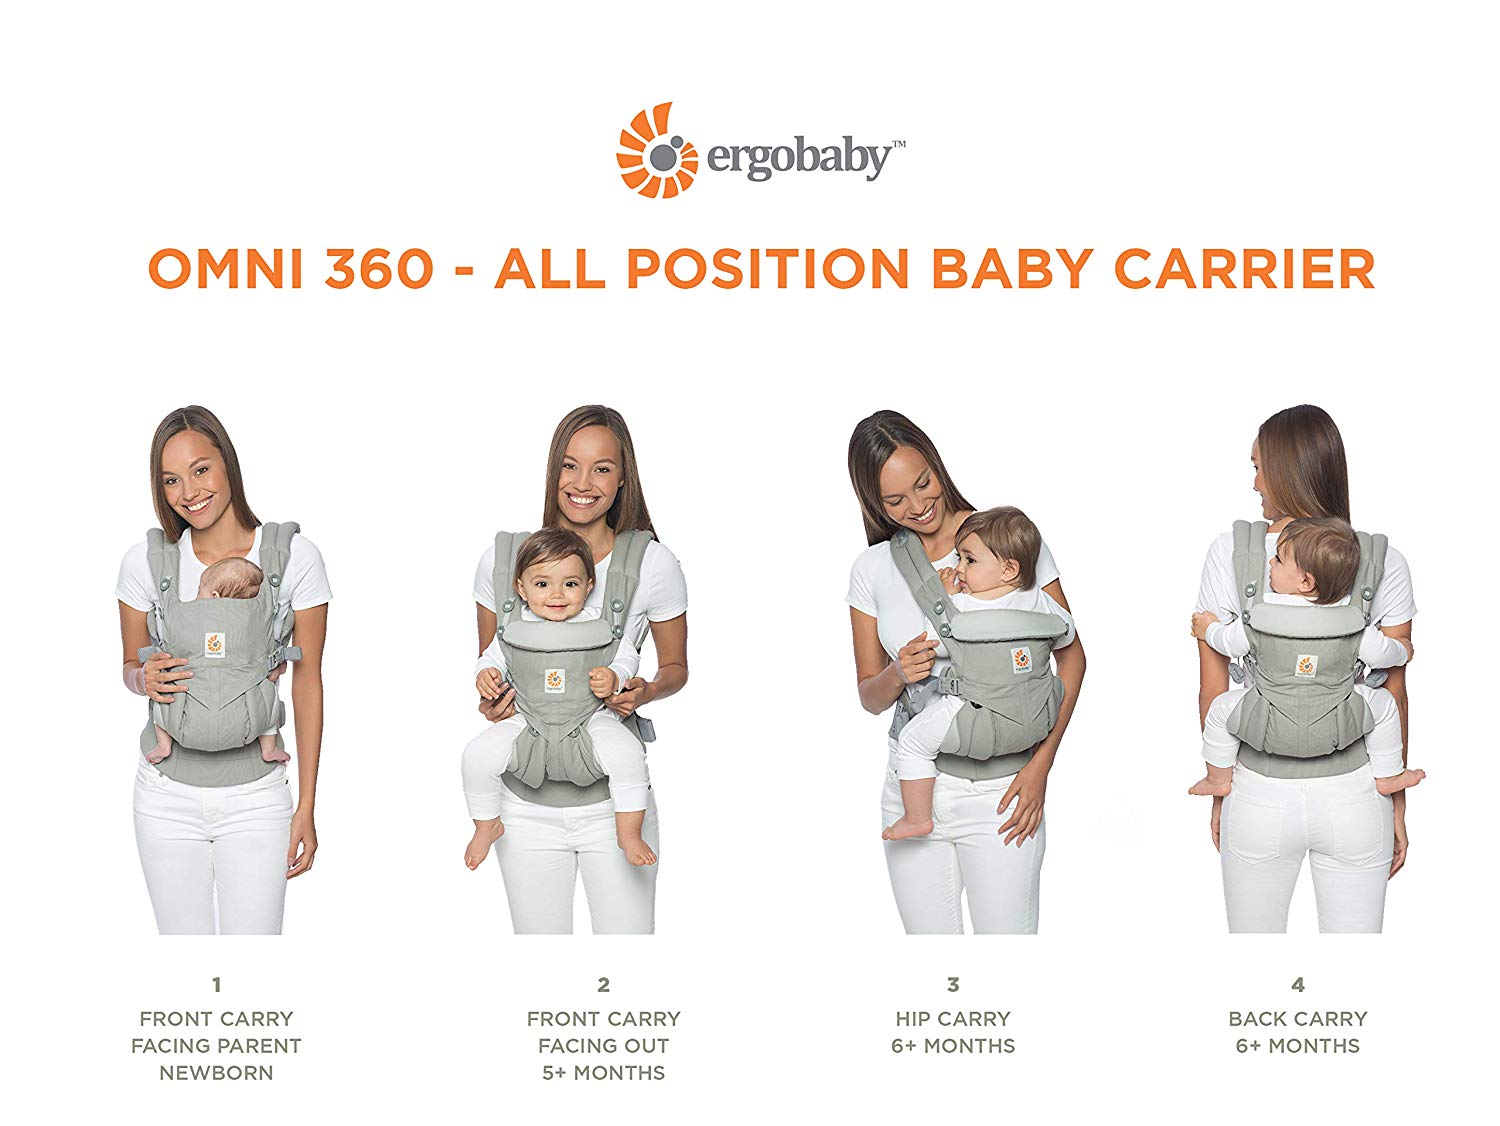 Ergobaby Baby Carrier Reviewed